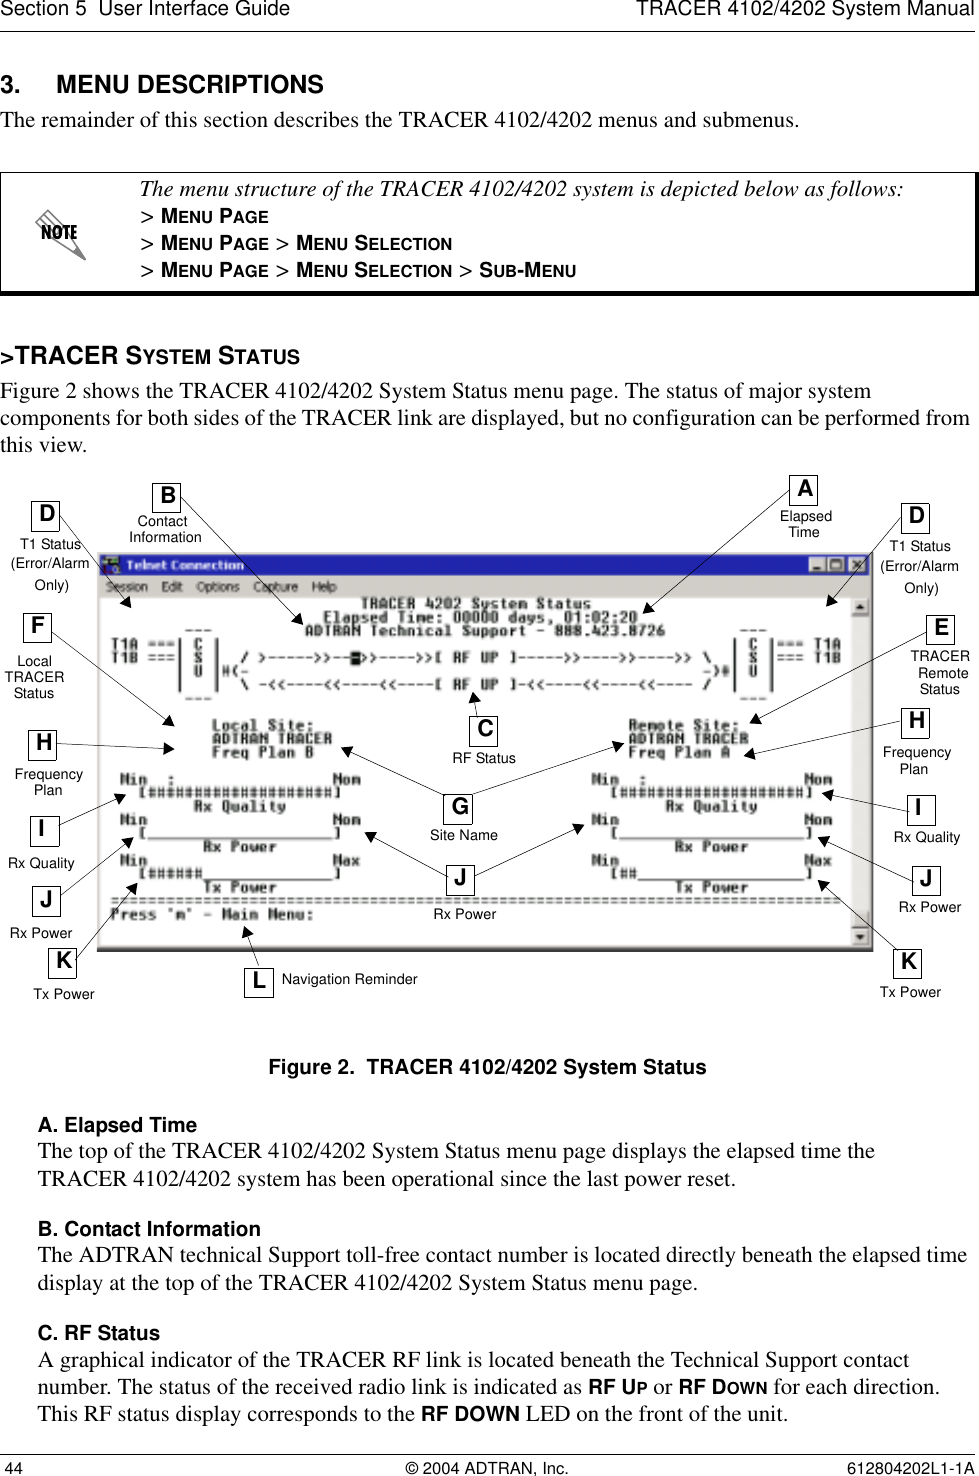 Section 5  User Interface Guide TRACER 4102/4202 System Manual 44 © 2004 ADTRAN, Inc. 612804202L1-1A3. MENU DESCRIPTIONSThe remainder of this section describes the TRACER 4102/4202 menus and submenus. &gt;TRACER SYSTEM STATUSFigure 2 shows the TRACER 4102/4202 System Status menu page. The status of major system components for both sides of the TRACER link are displayed, but no configuration can be performed from this view.Figure 2.  TRACER 4102/4202 System StatusA. Elapsed TimeThe top of the TRACER 4102/4202 System Status menu page displays the elapsed time theTRACER 4102/4202 system has been operational since the last power reset.B. Contact InformationThe ADTRAN technical Support toll-free contact number is located directly beneath the elapsed time display at the top of the TRACER 4102/4202 System Status menu page.C. RF StatusA graphical indicator of the TRACER RF link is located beneath the Technical Support contact number. The status of the received radio link is indicated as RF UP or RF DOWN for each direction. This RF status display corresponds to the RF DOWN LED on the front of the unit.The menu structure of the TRACER 4102/4202 system is depicted below as follows:&gt; MENU PAGE&gt; MENU PAGE &gt; MENU SELECTION&gt; MENU PAGE &gt; MENU SELECTION &gt; SUB-MENUAElapsedTimeBContactInformationFLocalHFrequencyIRx PowerCRF StatusGDT1 StatusERemoteHIRx QualityKTx PowerJTx PowerKNavigation Reminder(Error/AlarmOnly)TRACERStatusPlanFrequencyPlanTRACERStatusSite NameDT1 Status(Error/AlarmOnly)LRx Quality JRx PowerJRx Power